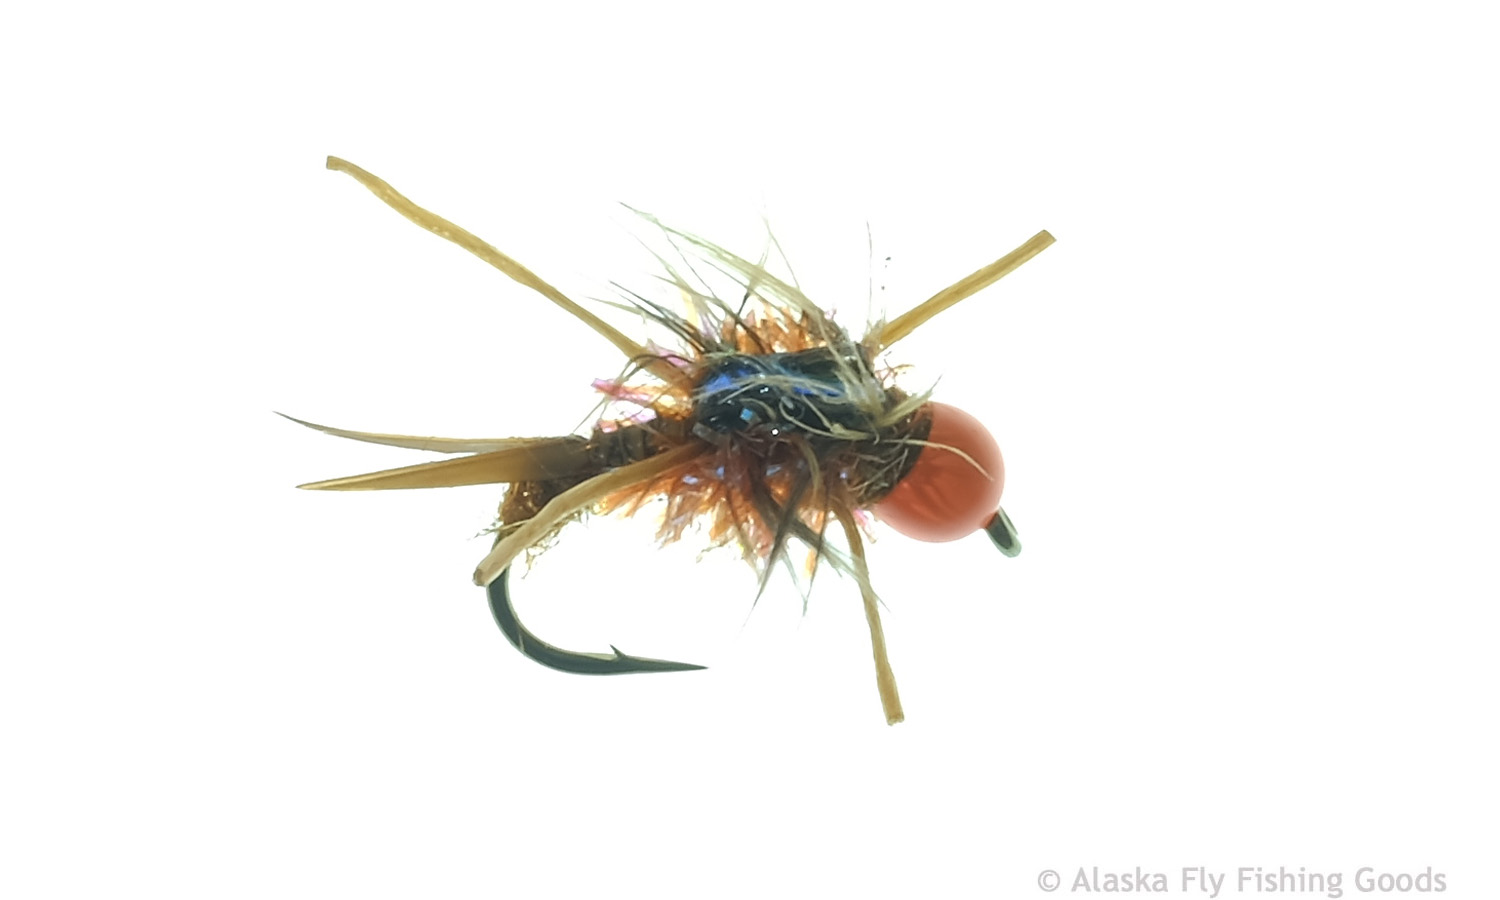 egg fishing flies - Fly Fishing, Gink and Gasoline